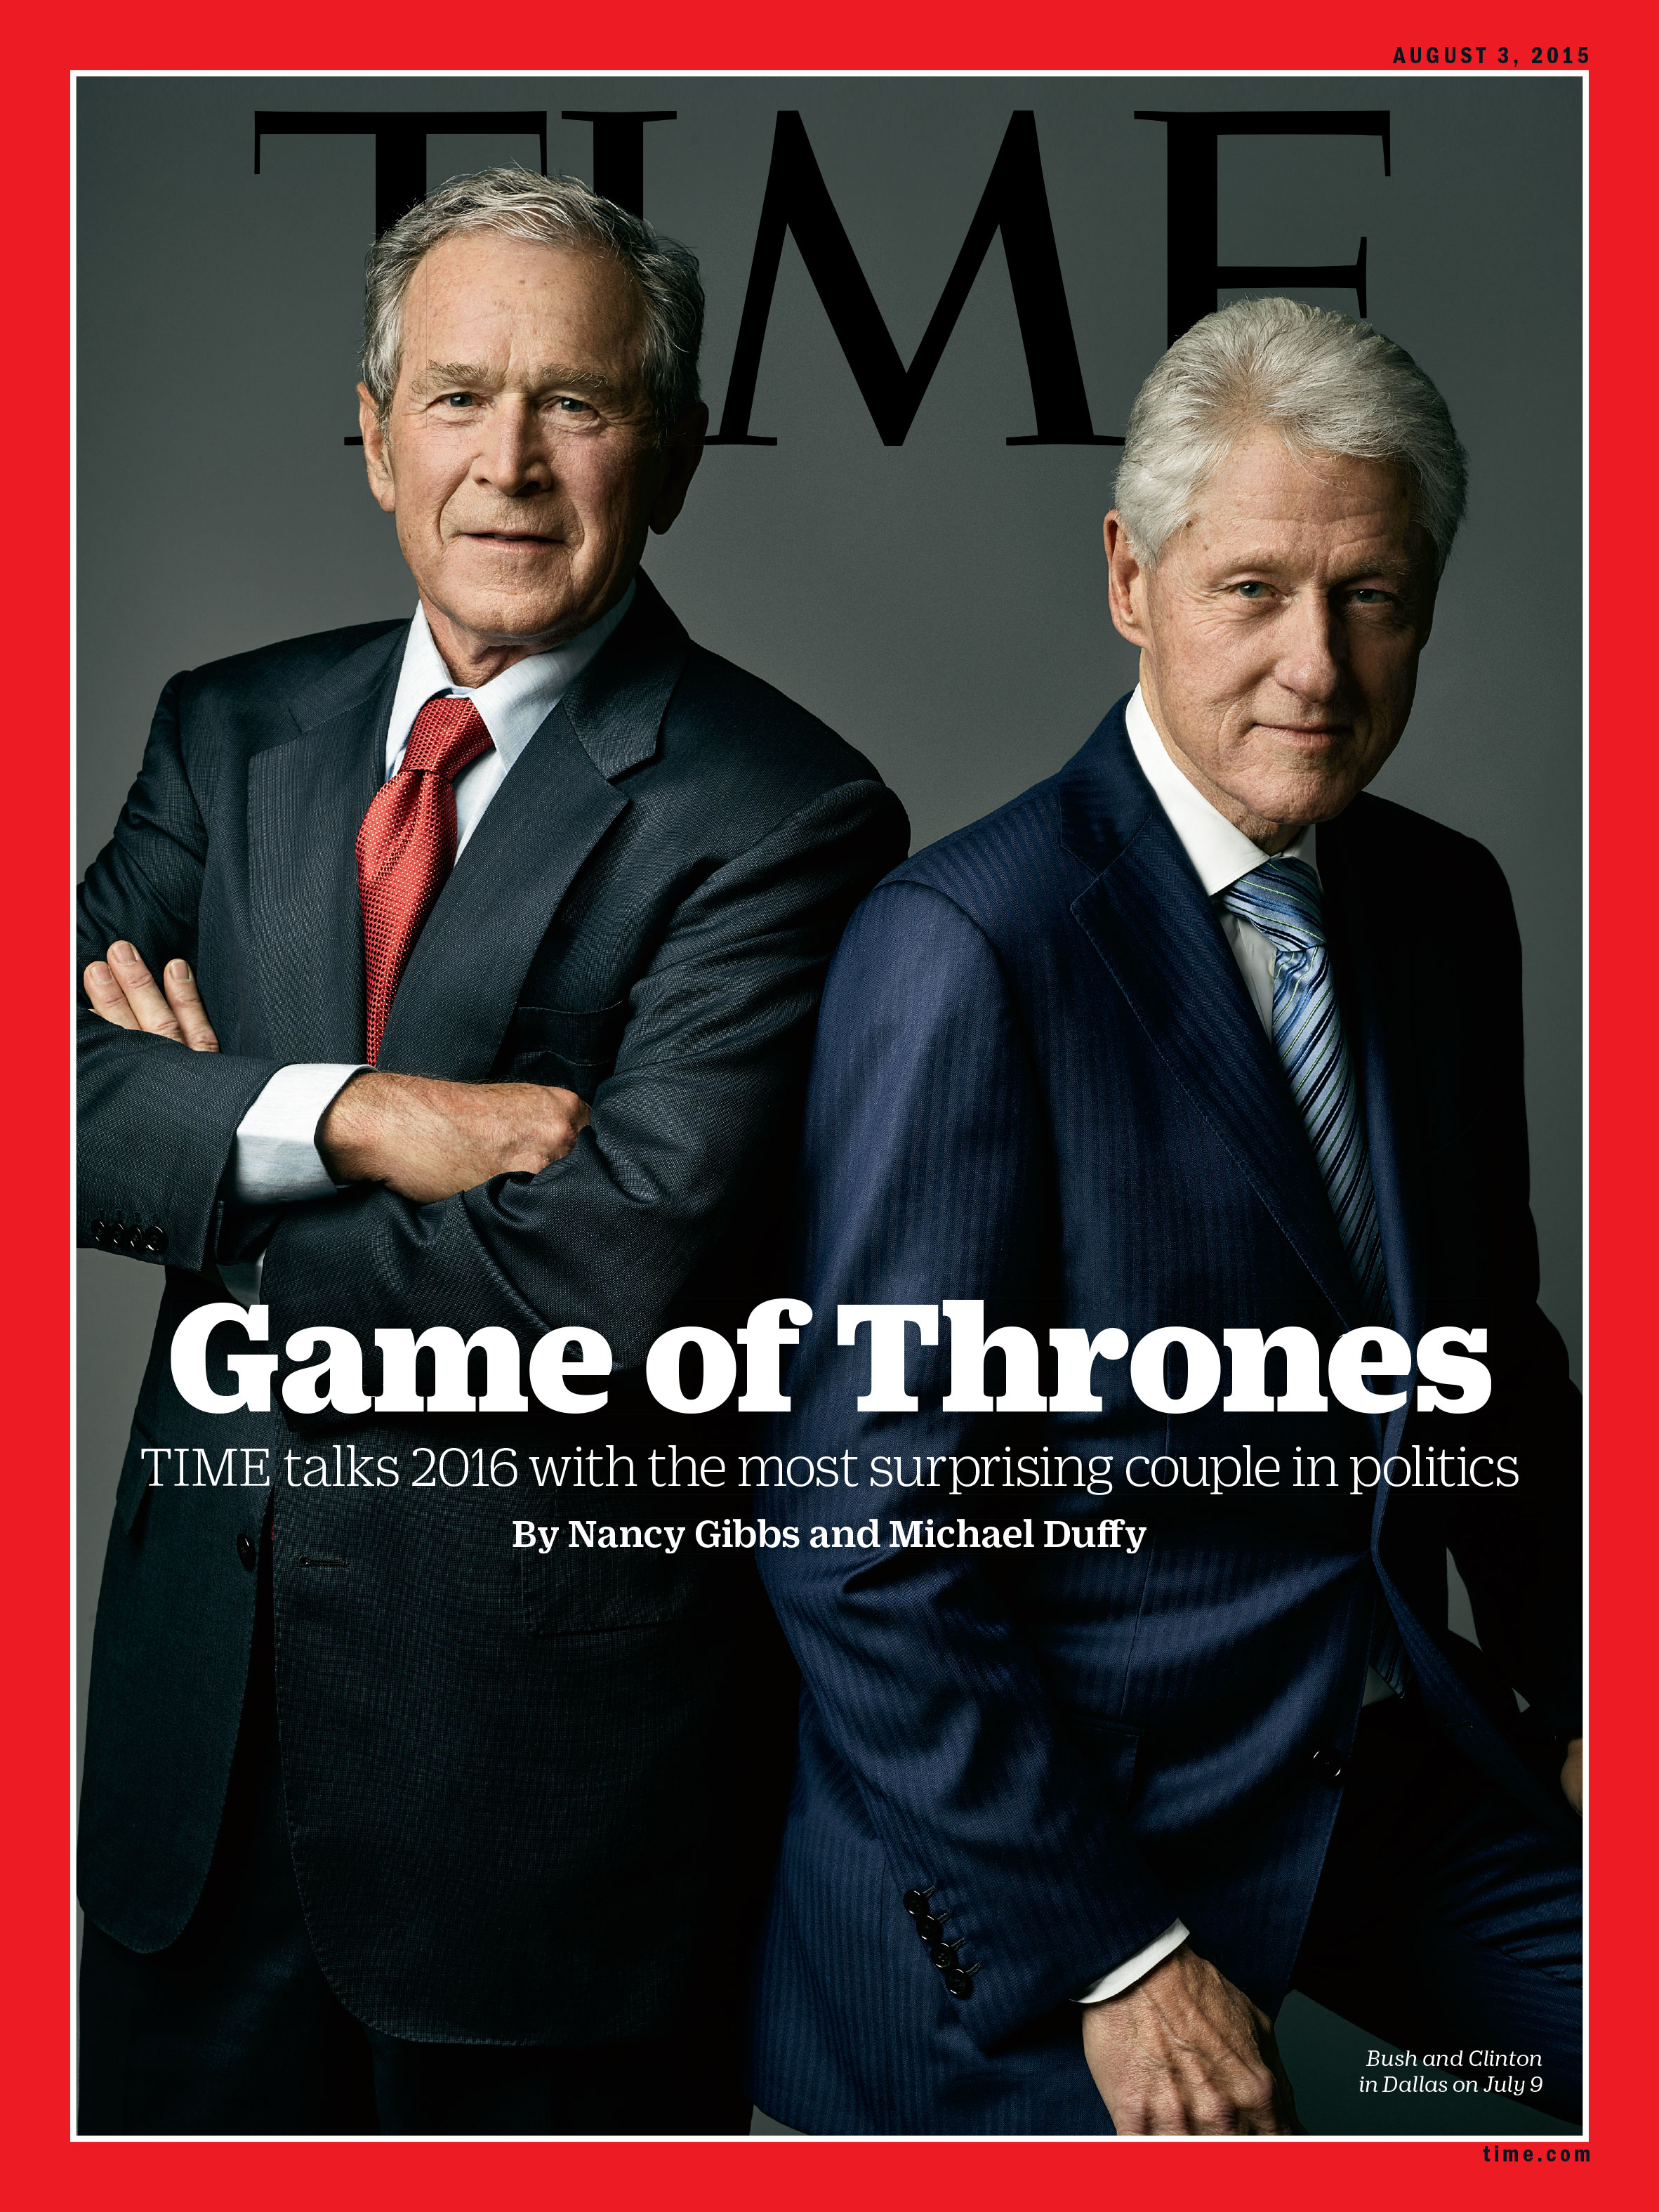 Bush and Clinton in Dallas on July 9 (Mark Seliger for TIME)